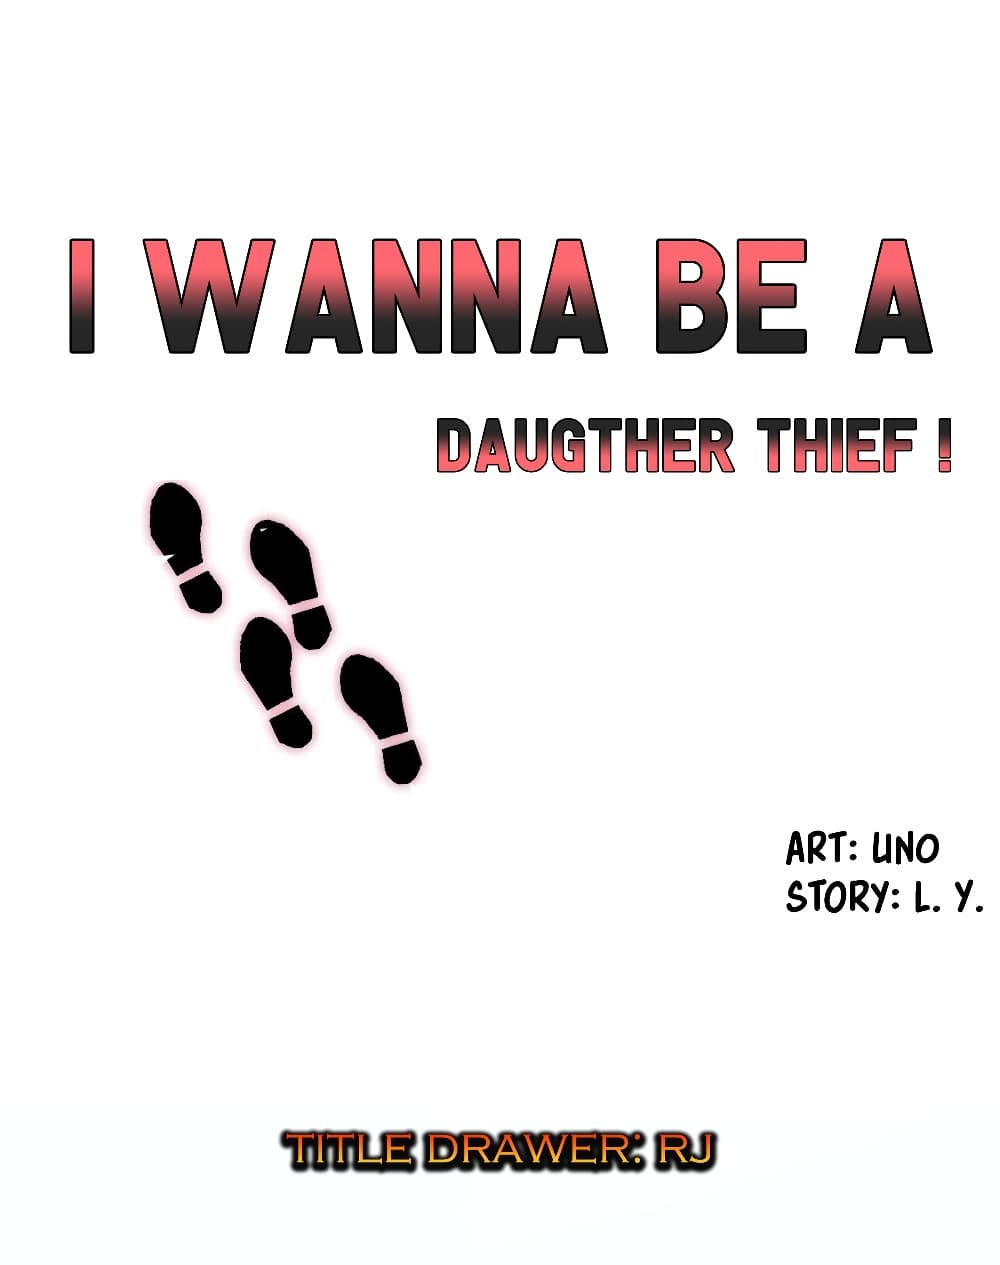 I Wanna Be a Daughter Thief 3 (1)